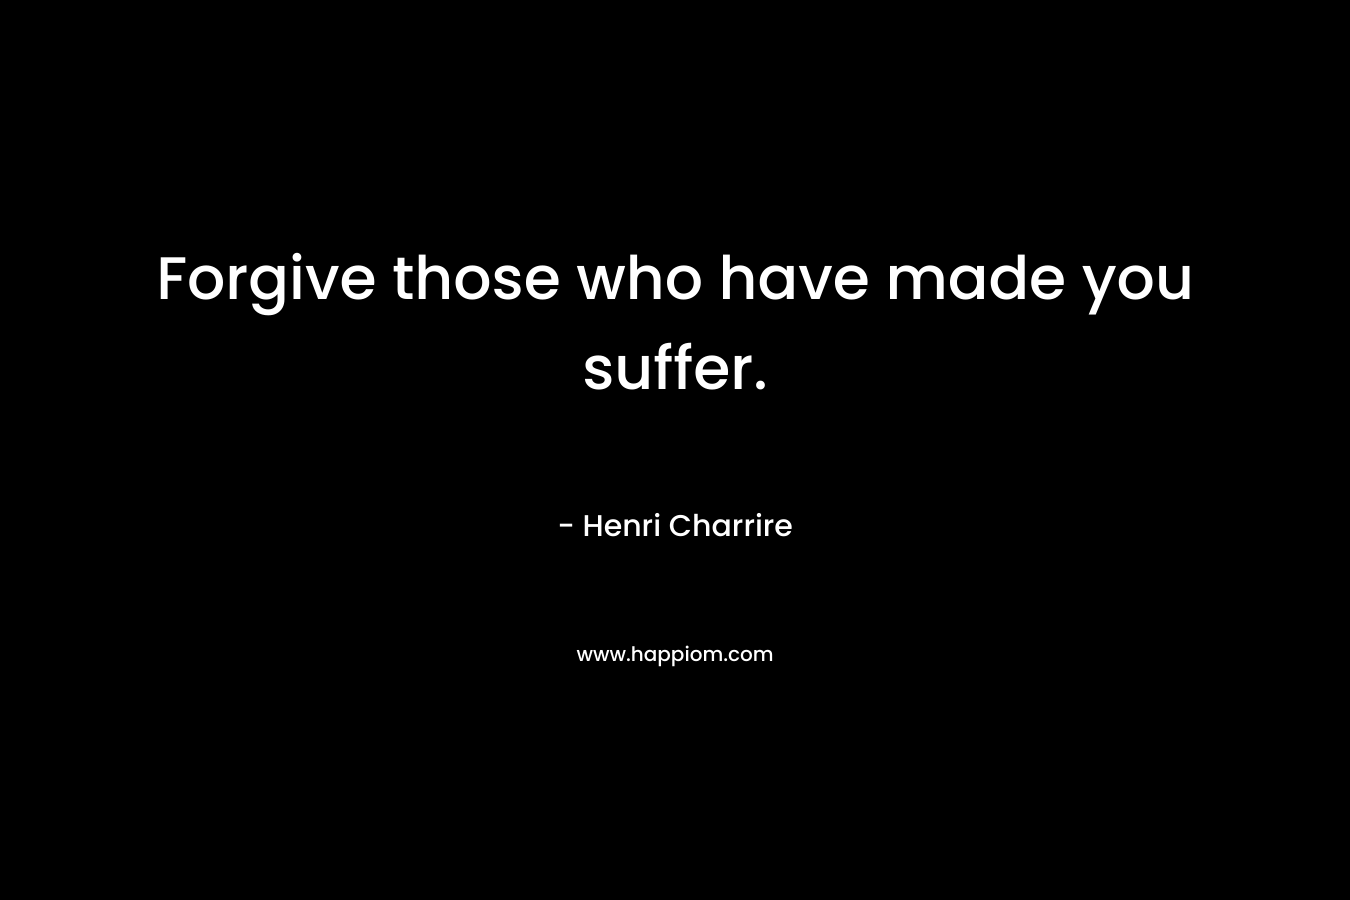 Forgive those who have made you suffer.